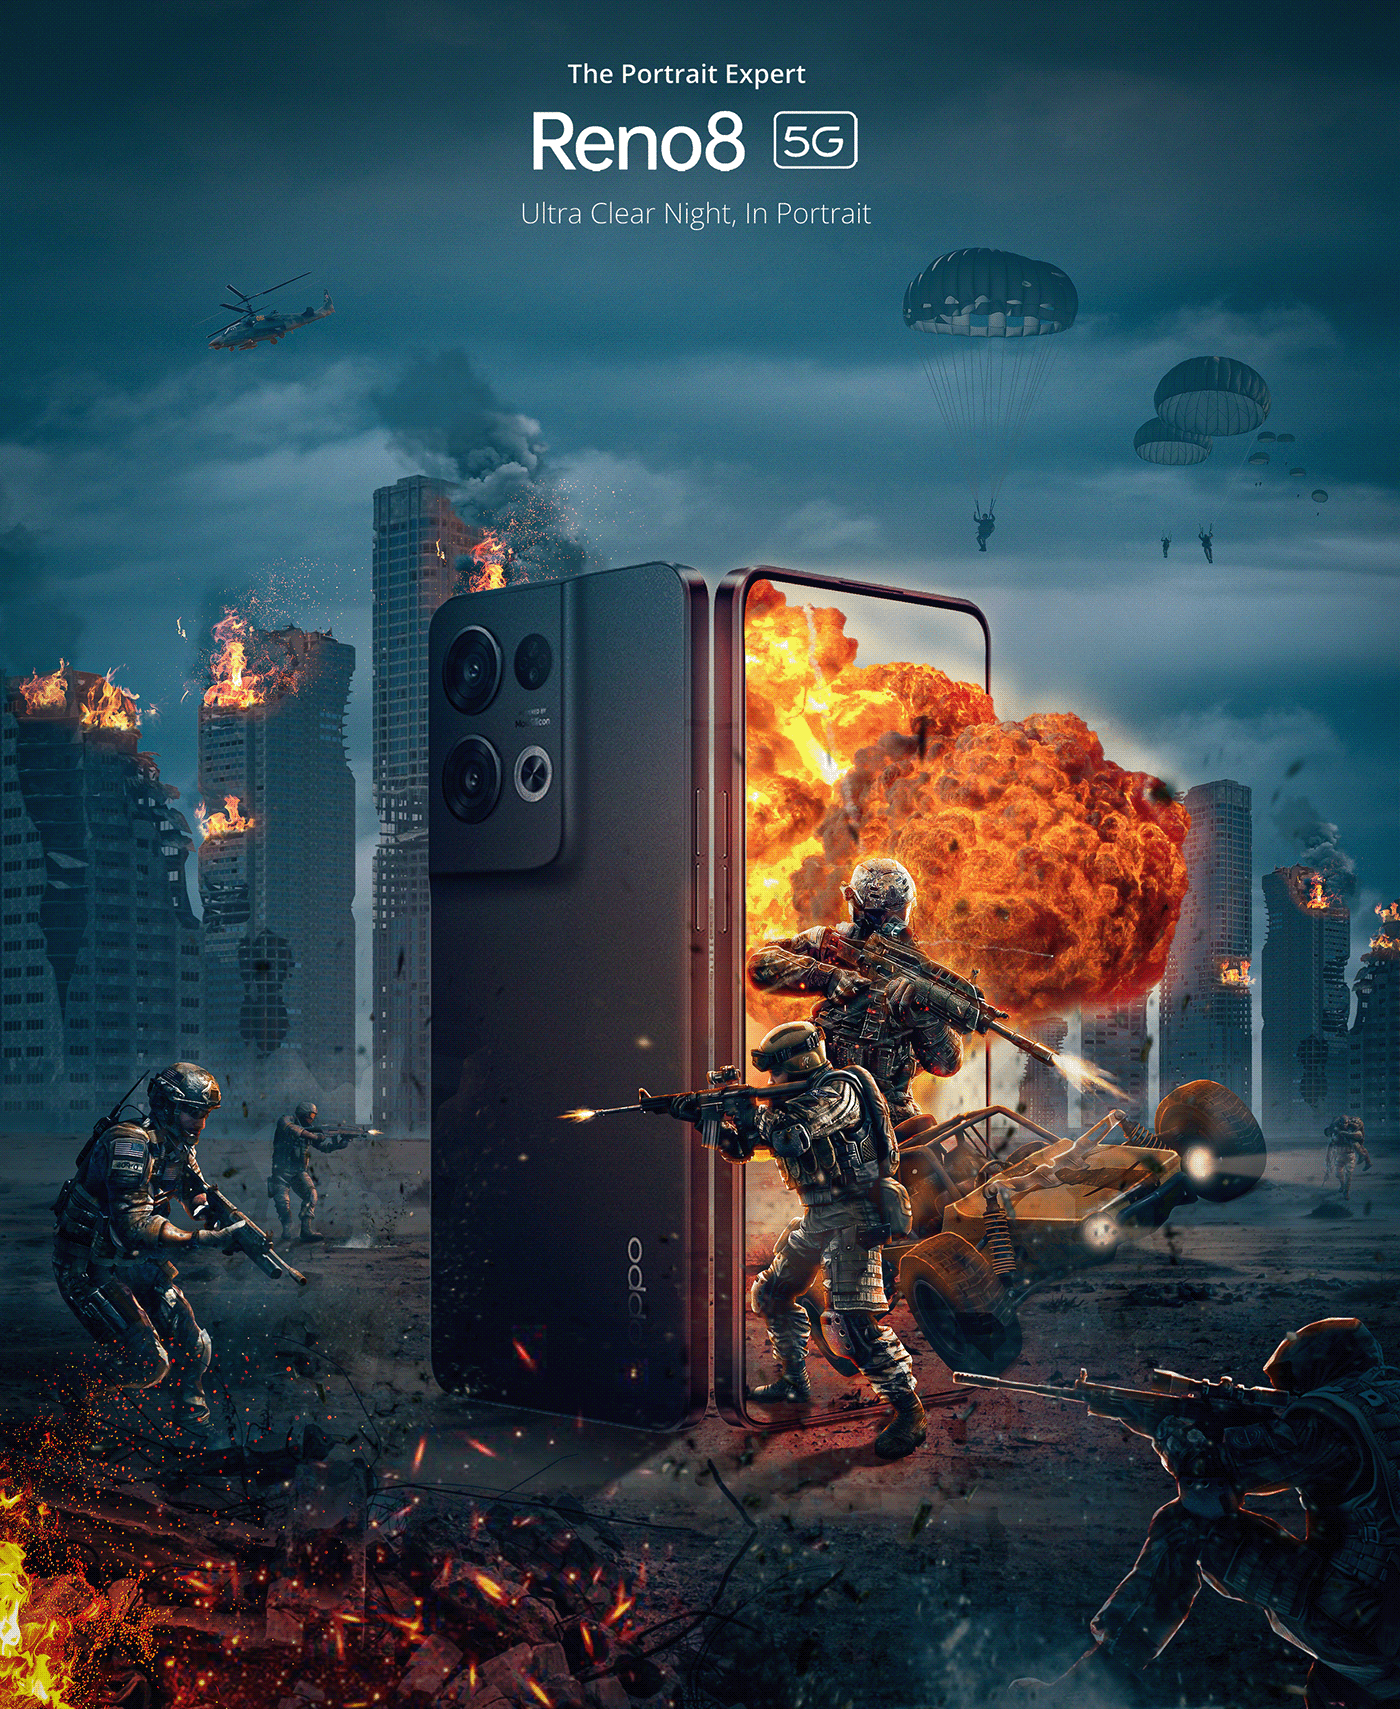 ads Advertising  call of duty game Gaming mobile Oppo pubg smartphone Digital Art 